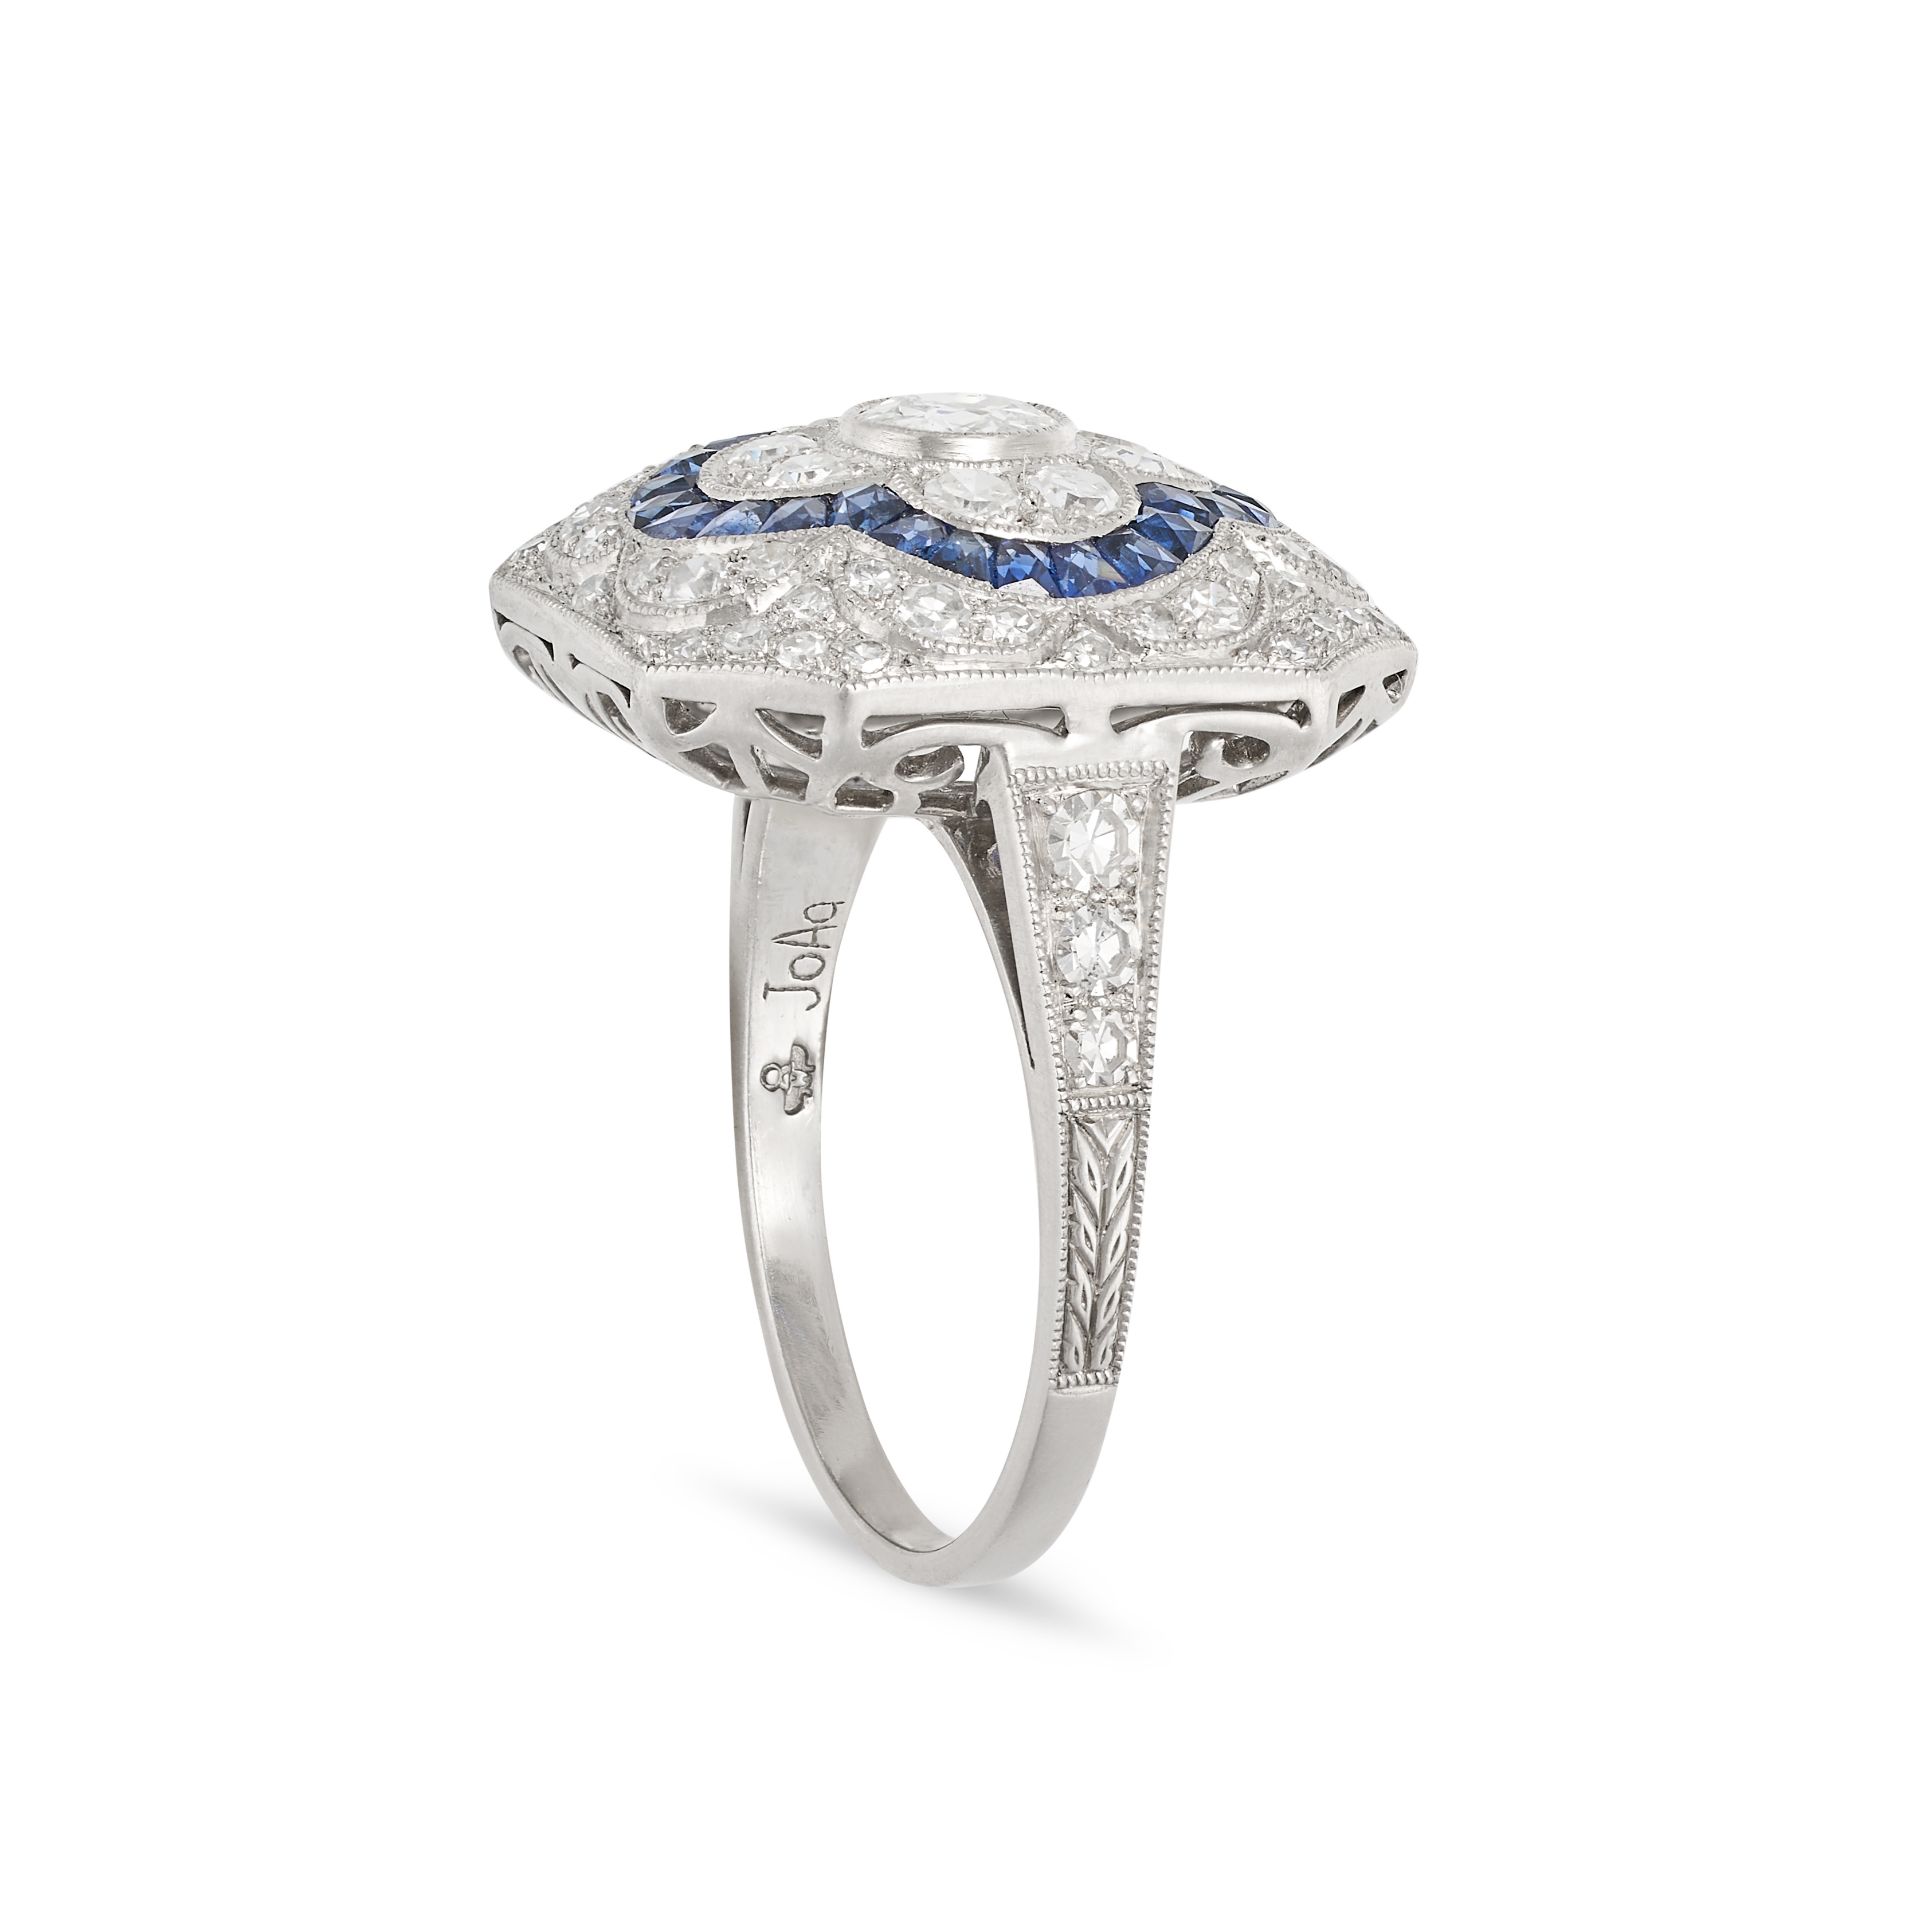 A VINTAGE SAPPHIRE AND DIAMOND DRESS RING in platinum, set with an old cut diamond of 0.19 carats... - Image 2 of 2